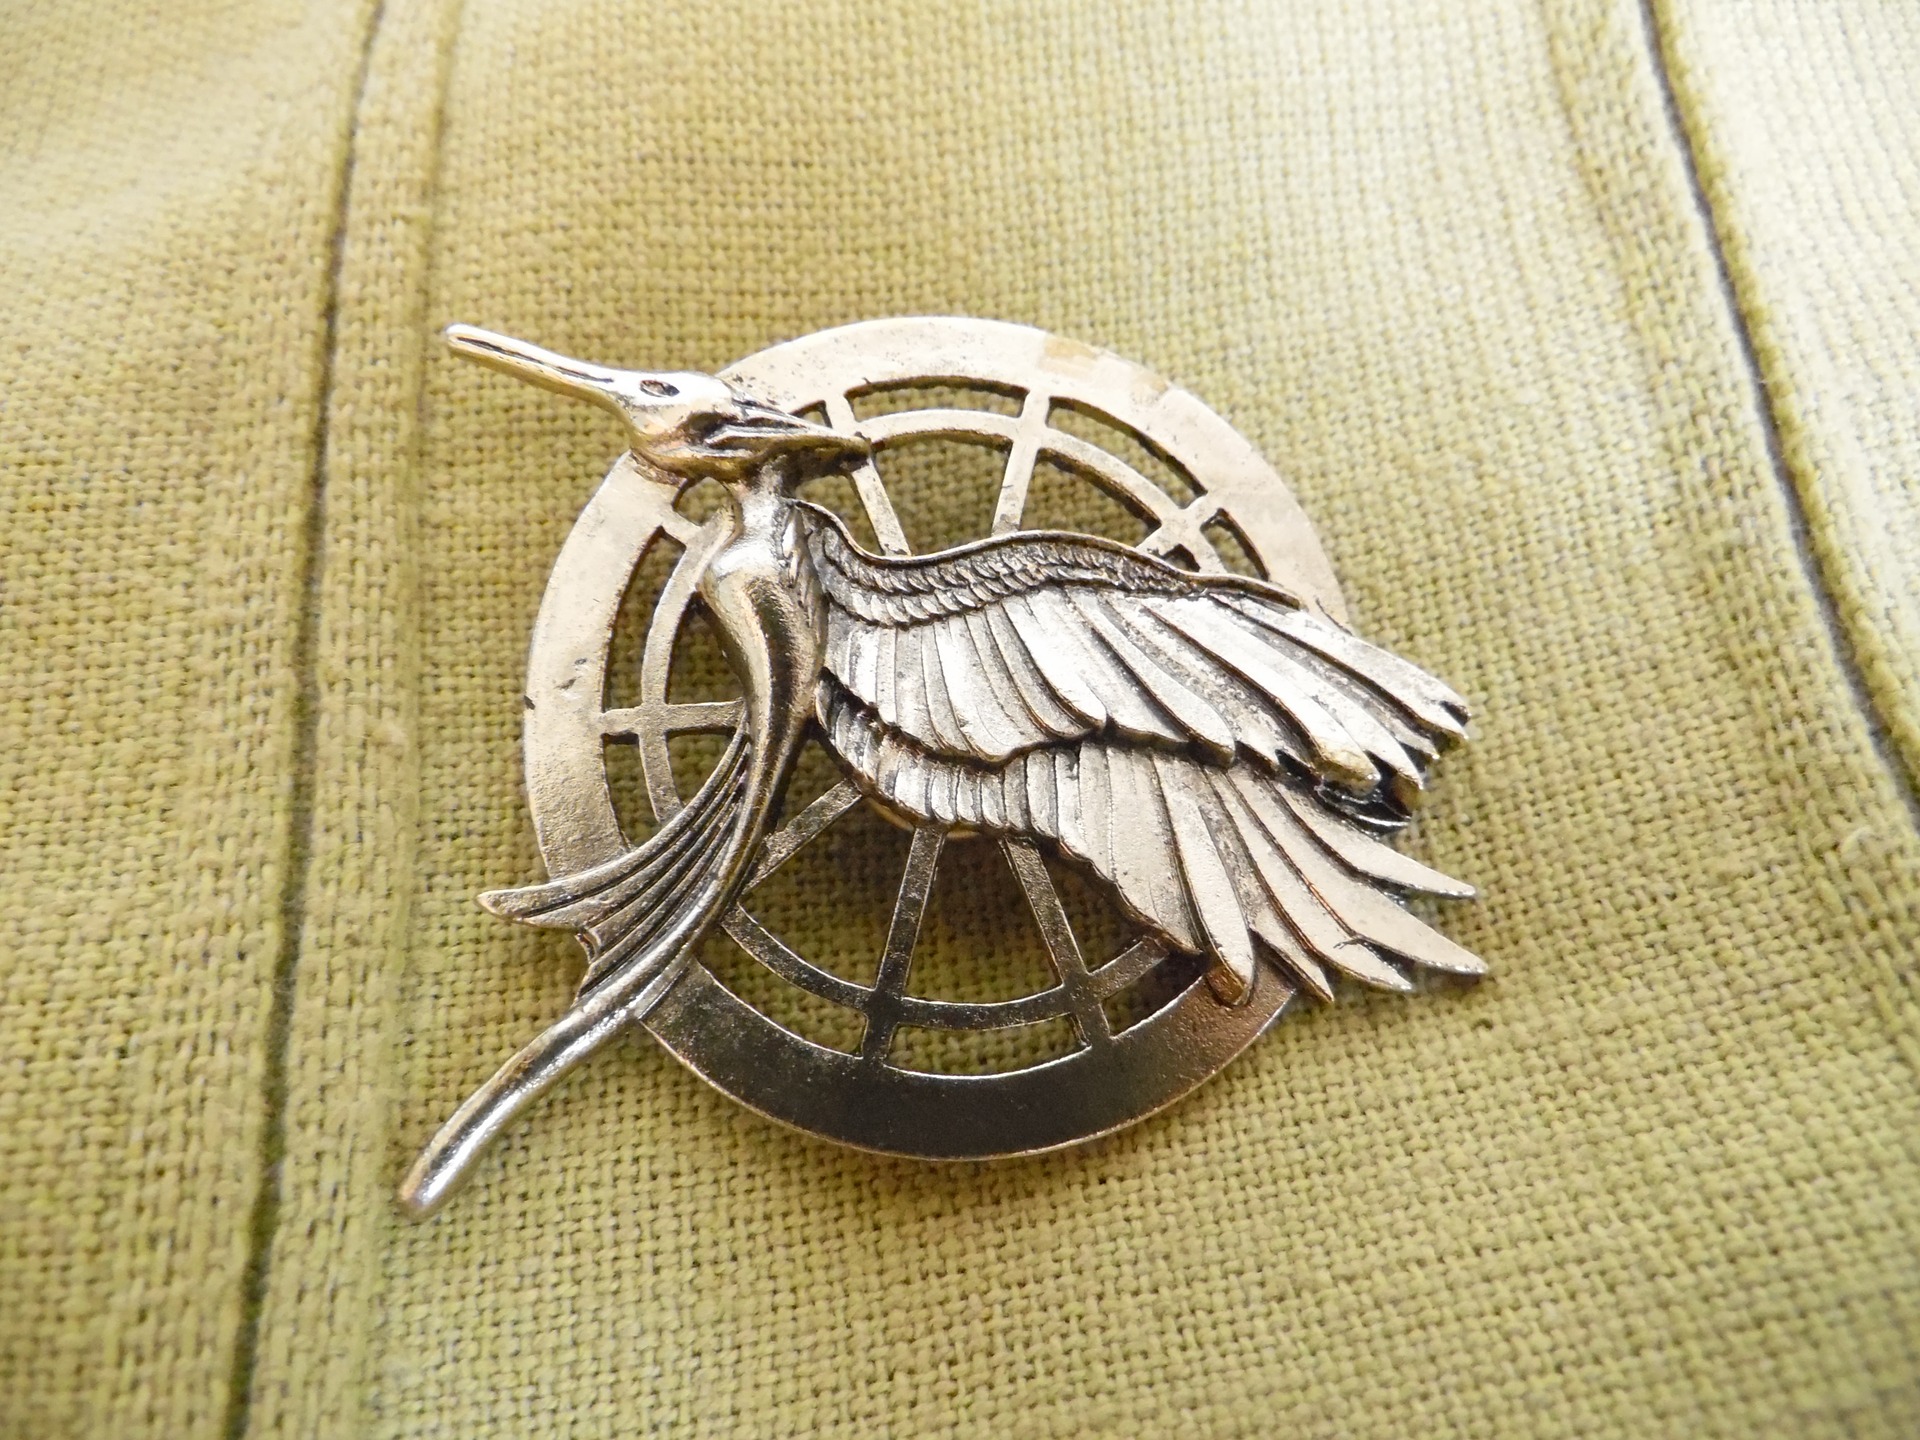 Mockingjay pin from The Hunger Games